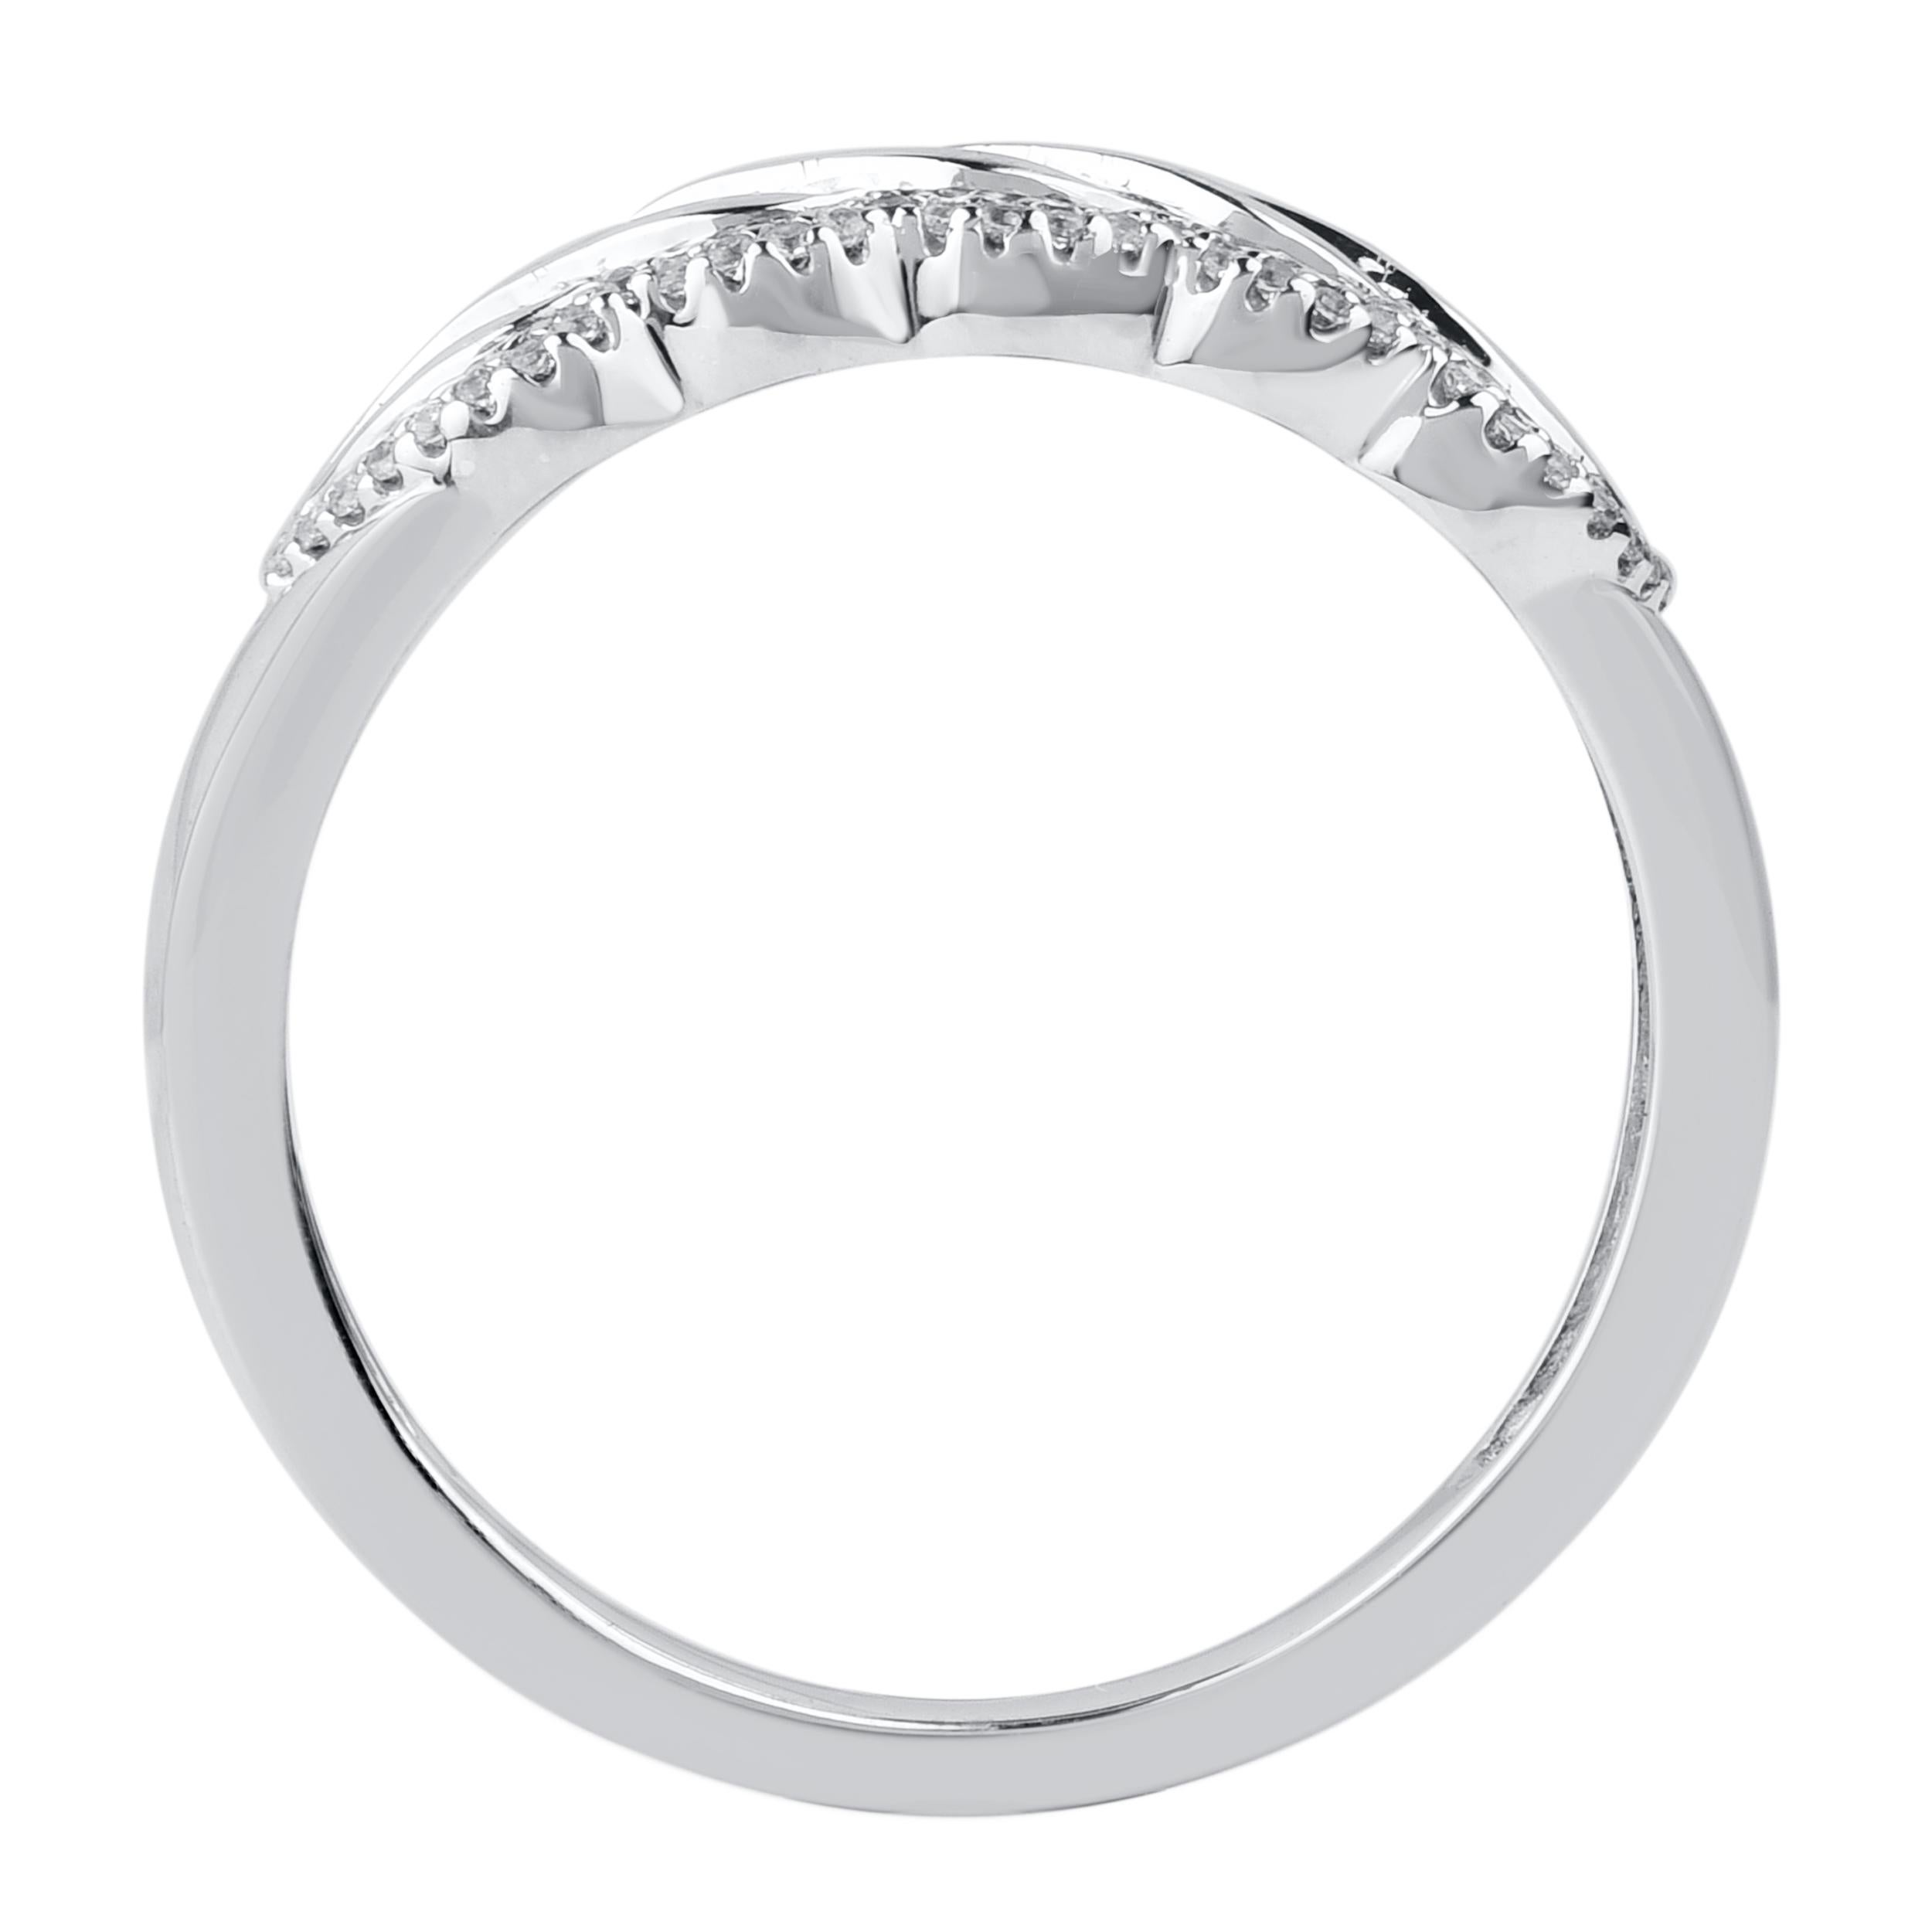 This beautiful engagement band ring features shimmering brilliant cut and single cut round diamonds in prong & channel setting. Crafted in 14 karat white gold. The ring is studded with a total of 75 brilliant & single cut natural round diamonds and